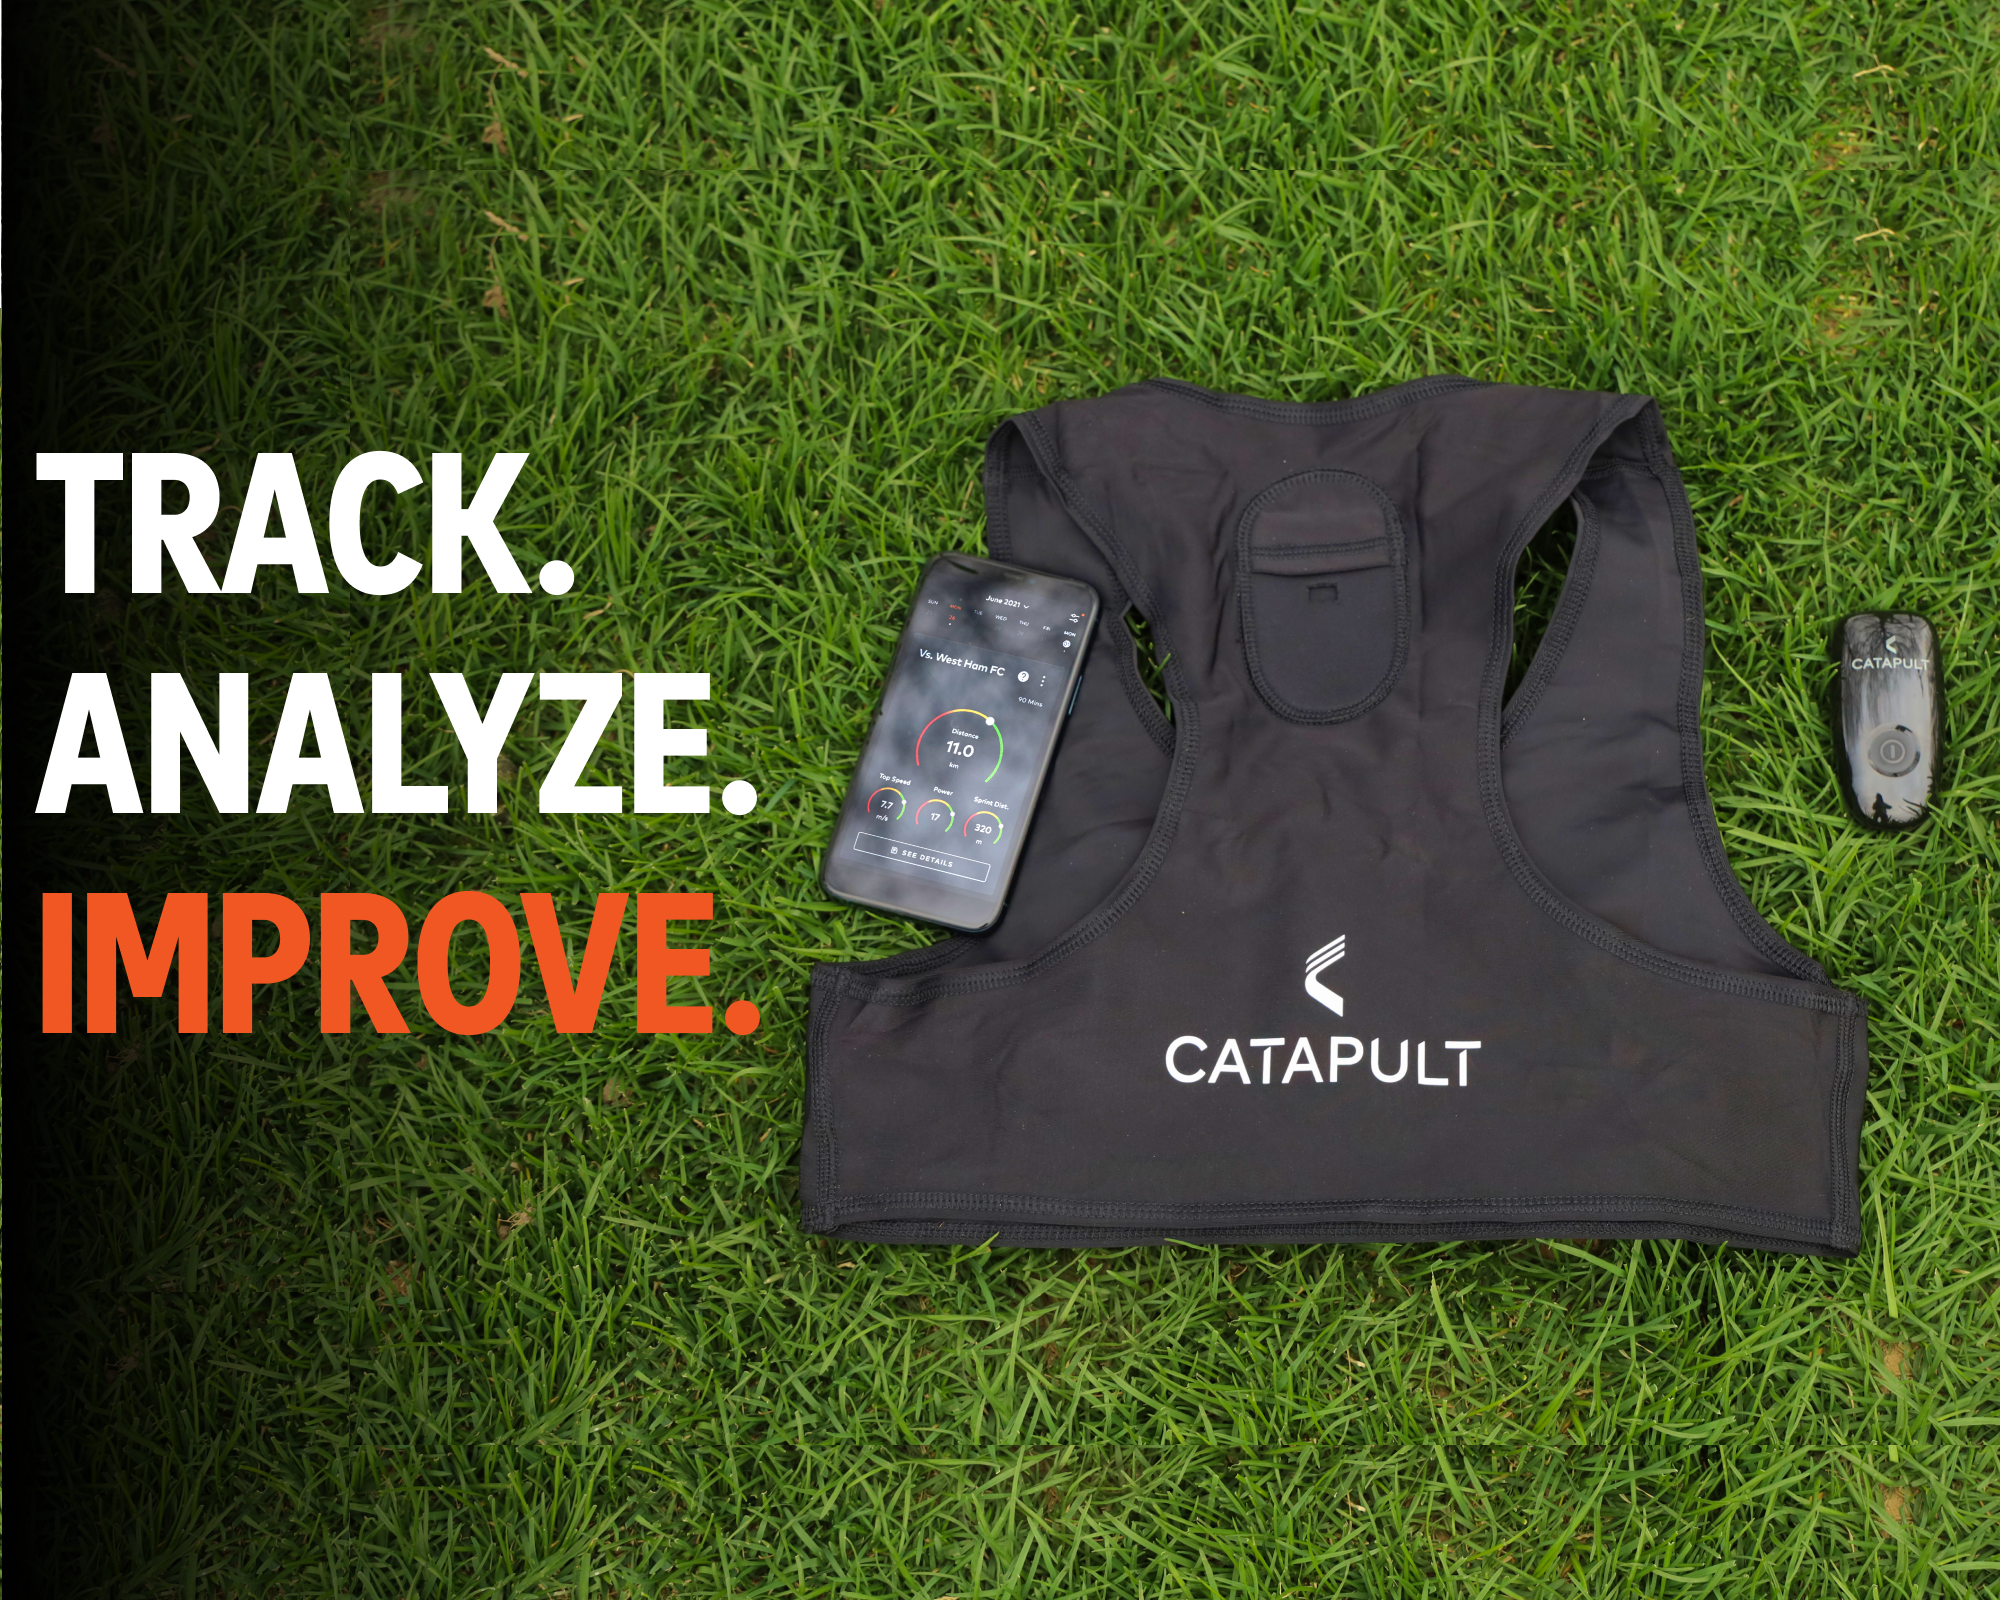 Best Selling Shopify Products on eu-store.catapultsports.com-4